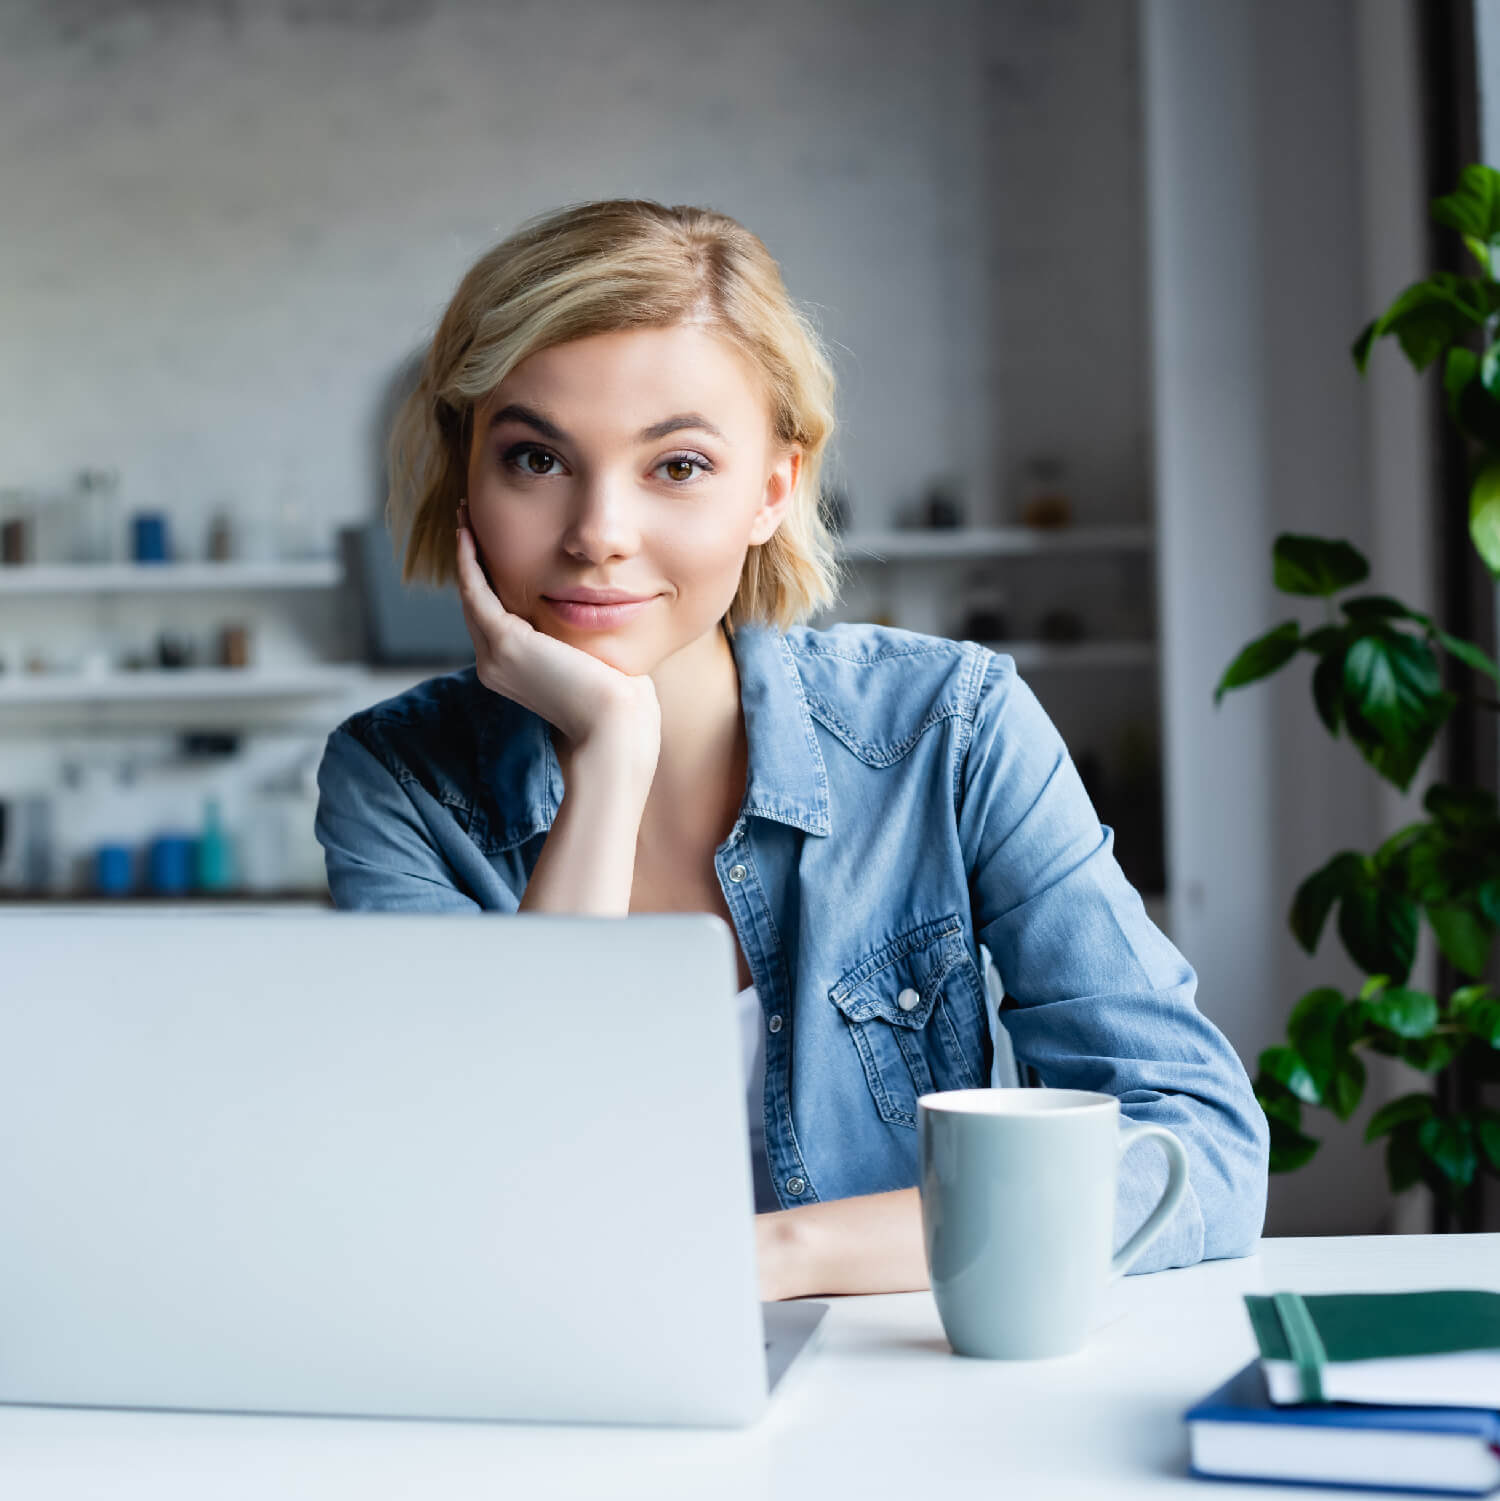 A young woman sitting at a white desk in a modern office. She is with an open laptop, a coffee mug, and notebooks in front of her, creating a friendly and approachable image suitable for a blog post on SEO essentials for small businesses.